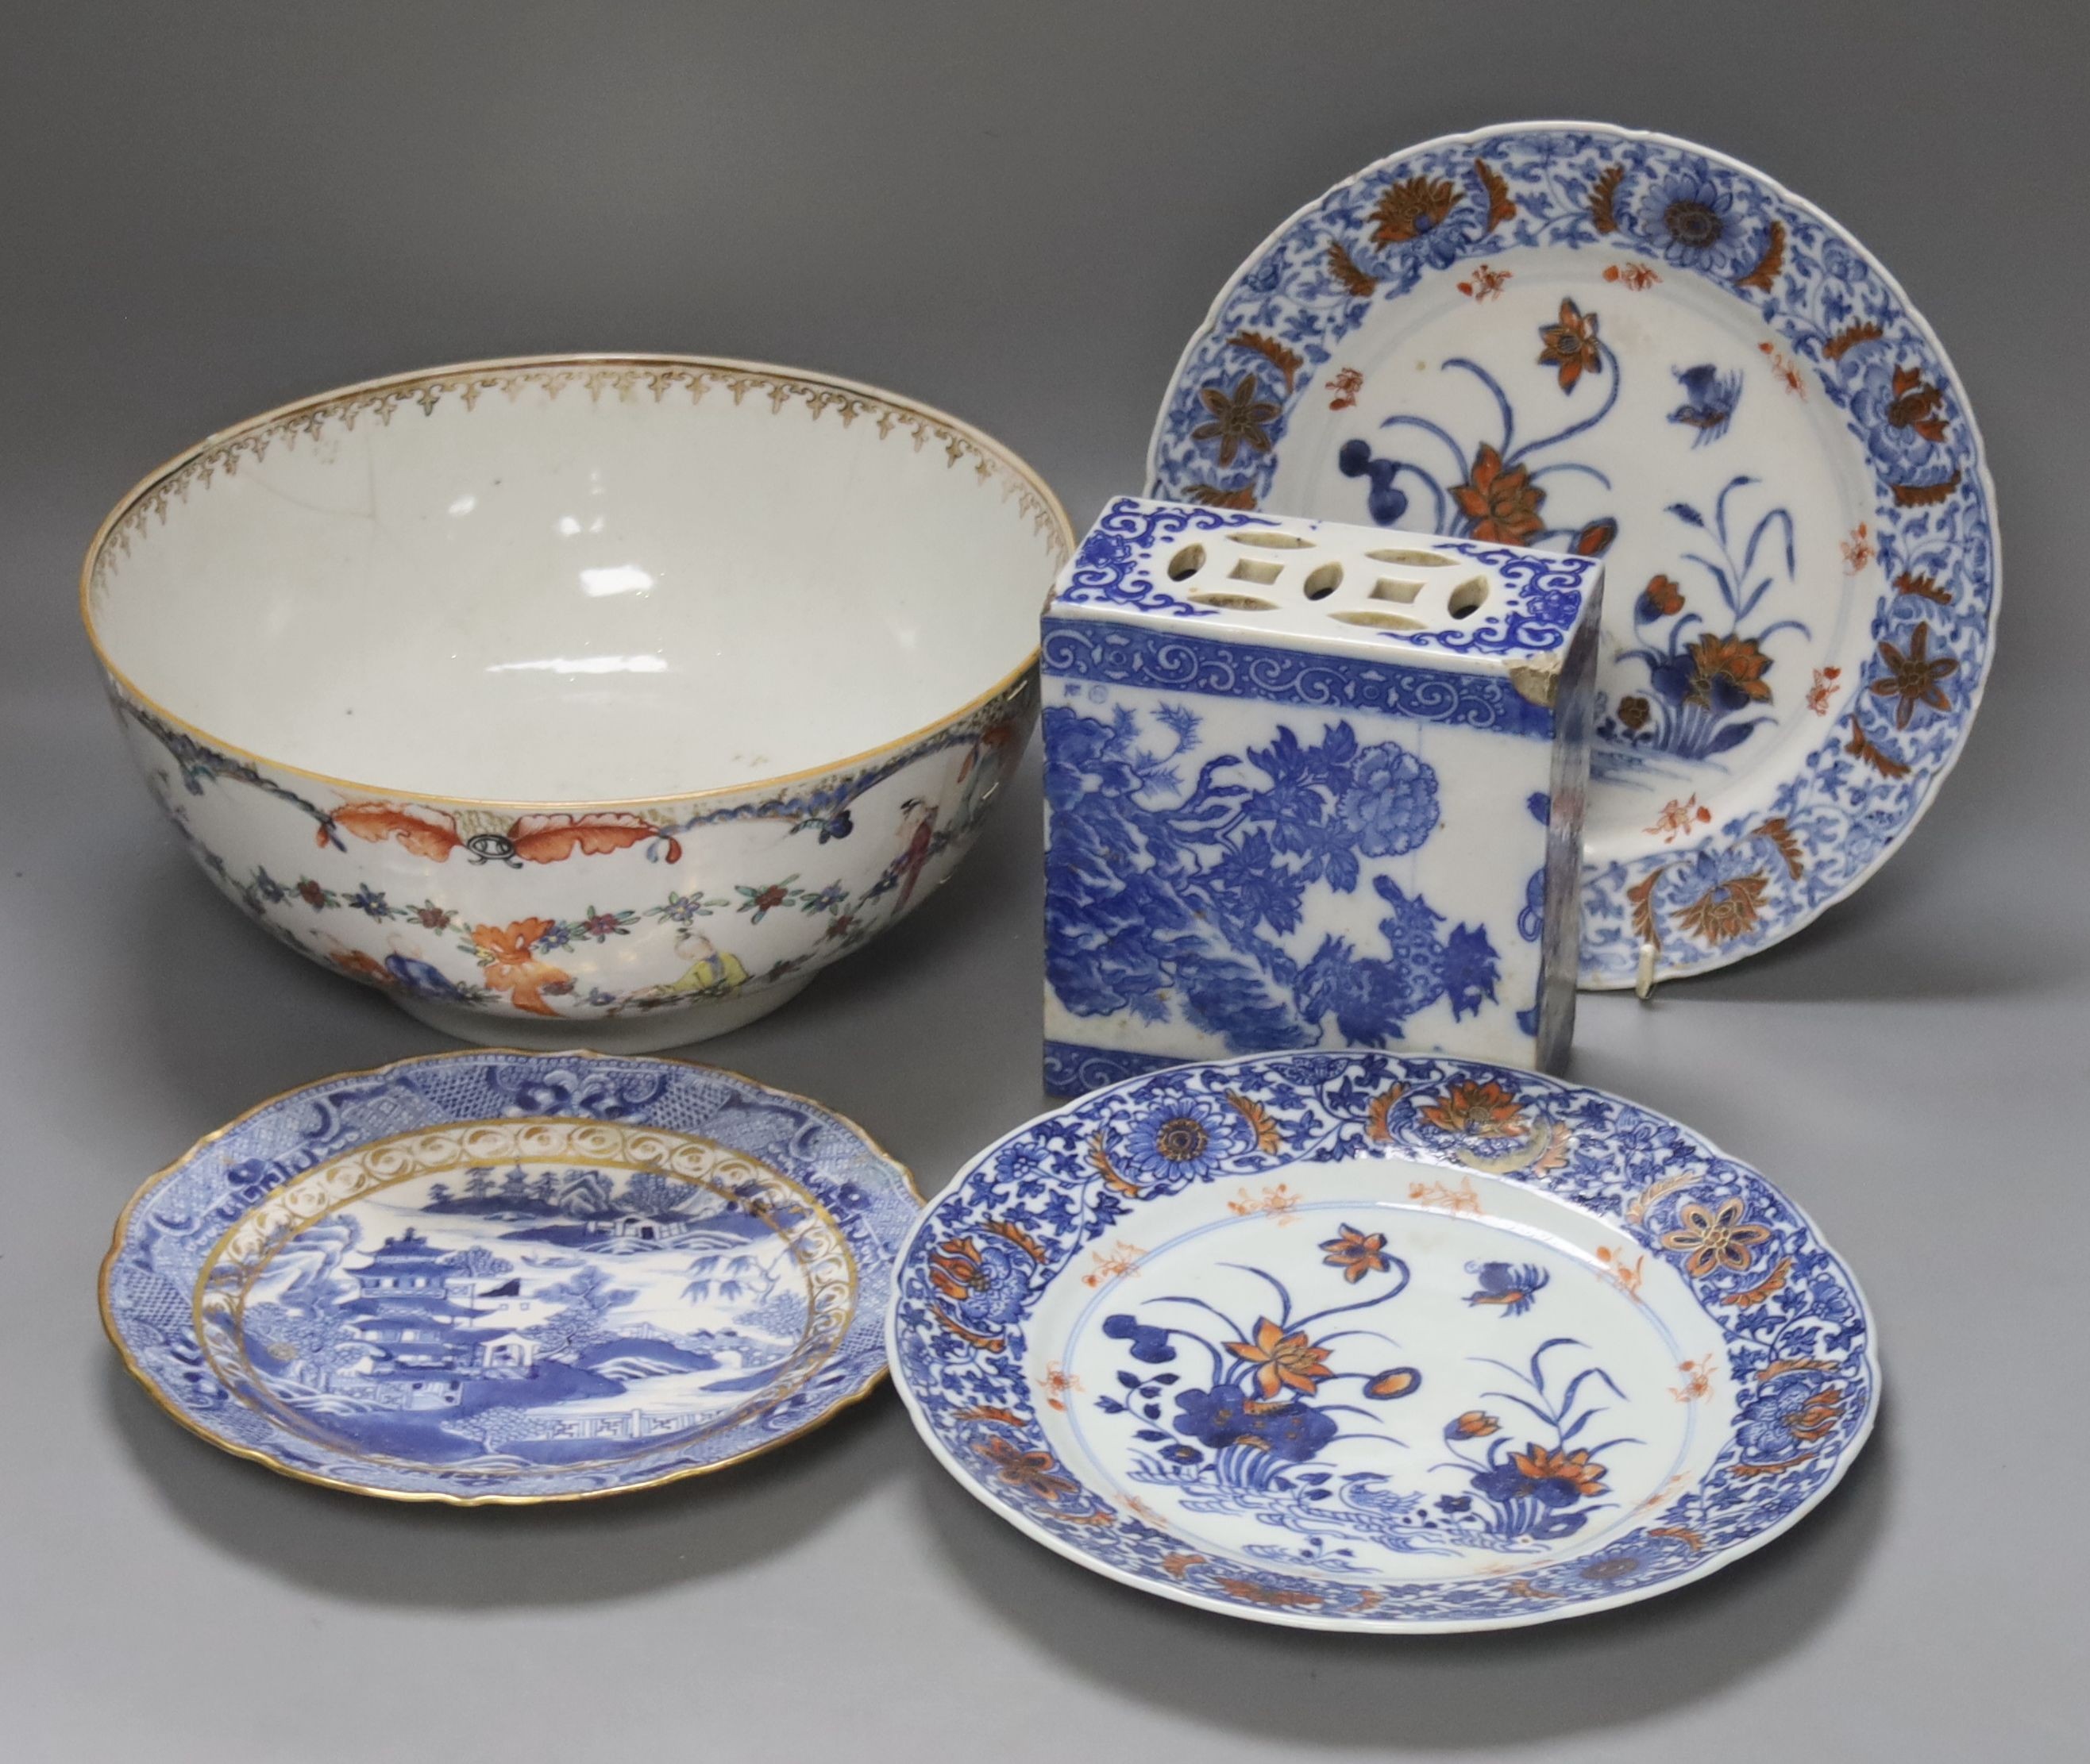 A Chinese blue and white pillow, an 18th century Chinese export bowl, diameter 26cm, and three similar plates